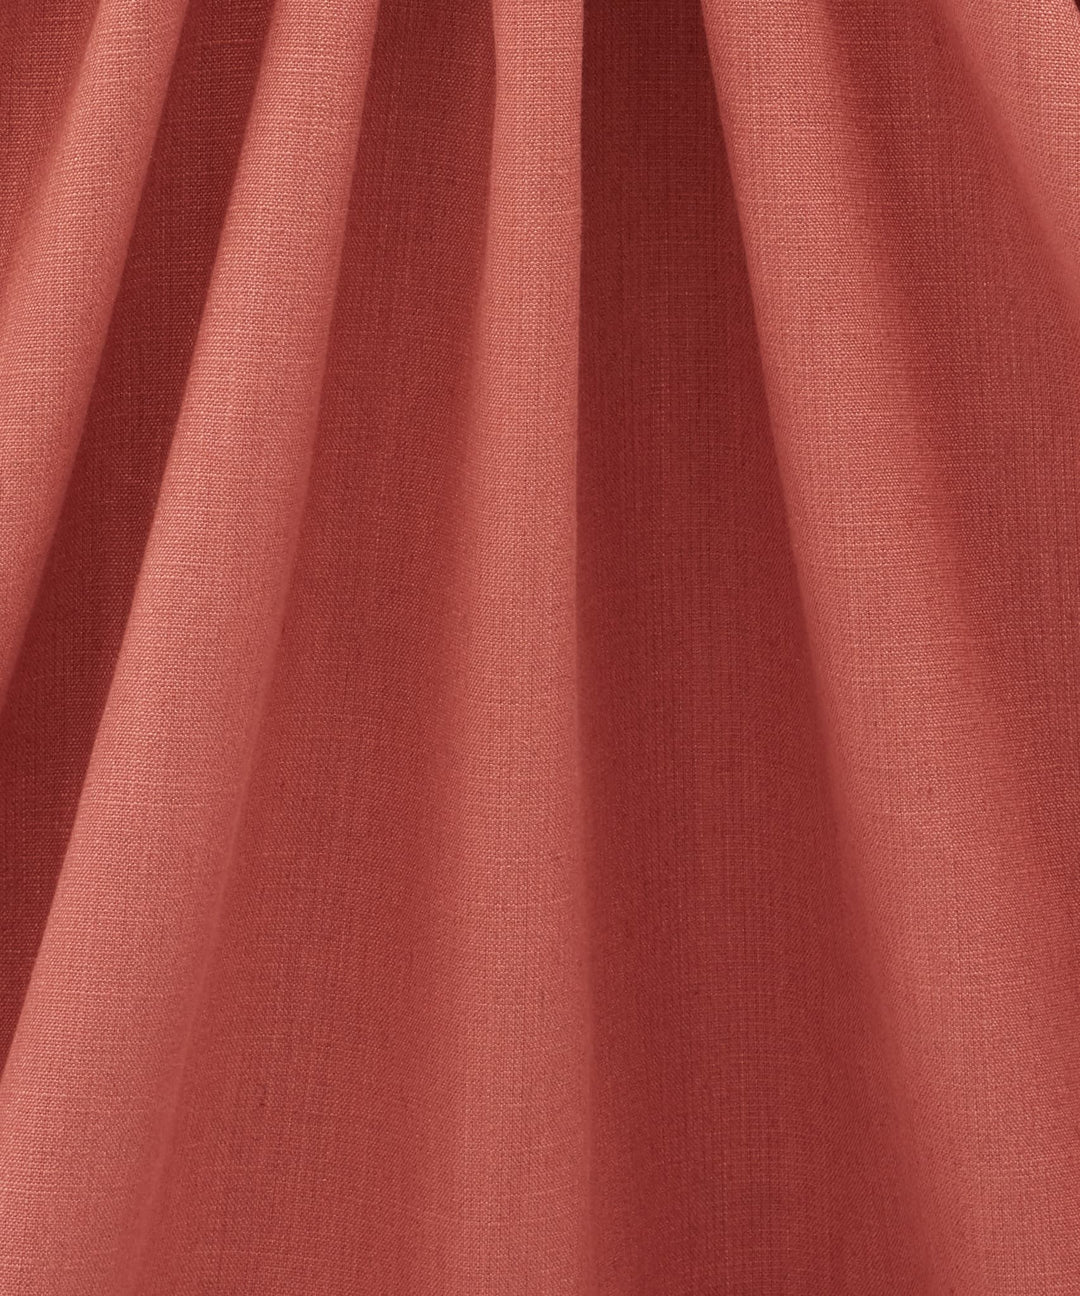 liberty-fabric-interiors-lacquer-coral-red-lustre-plain-complimentary-fabric